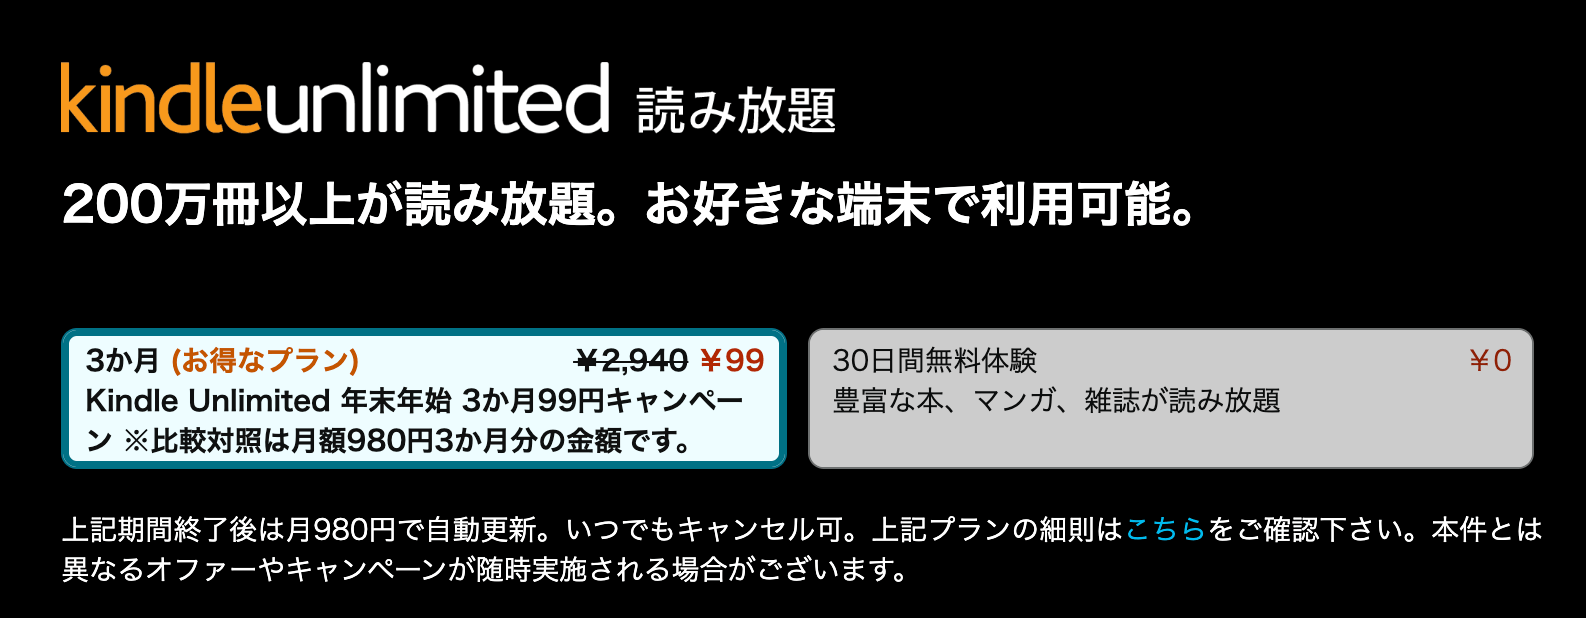 Kindle Unlimited 2ヶ月99円キャンペーン